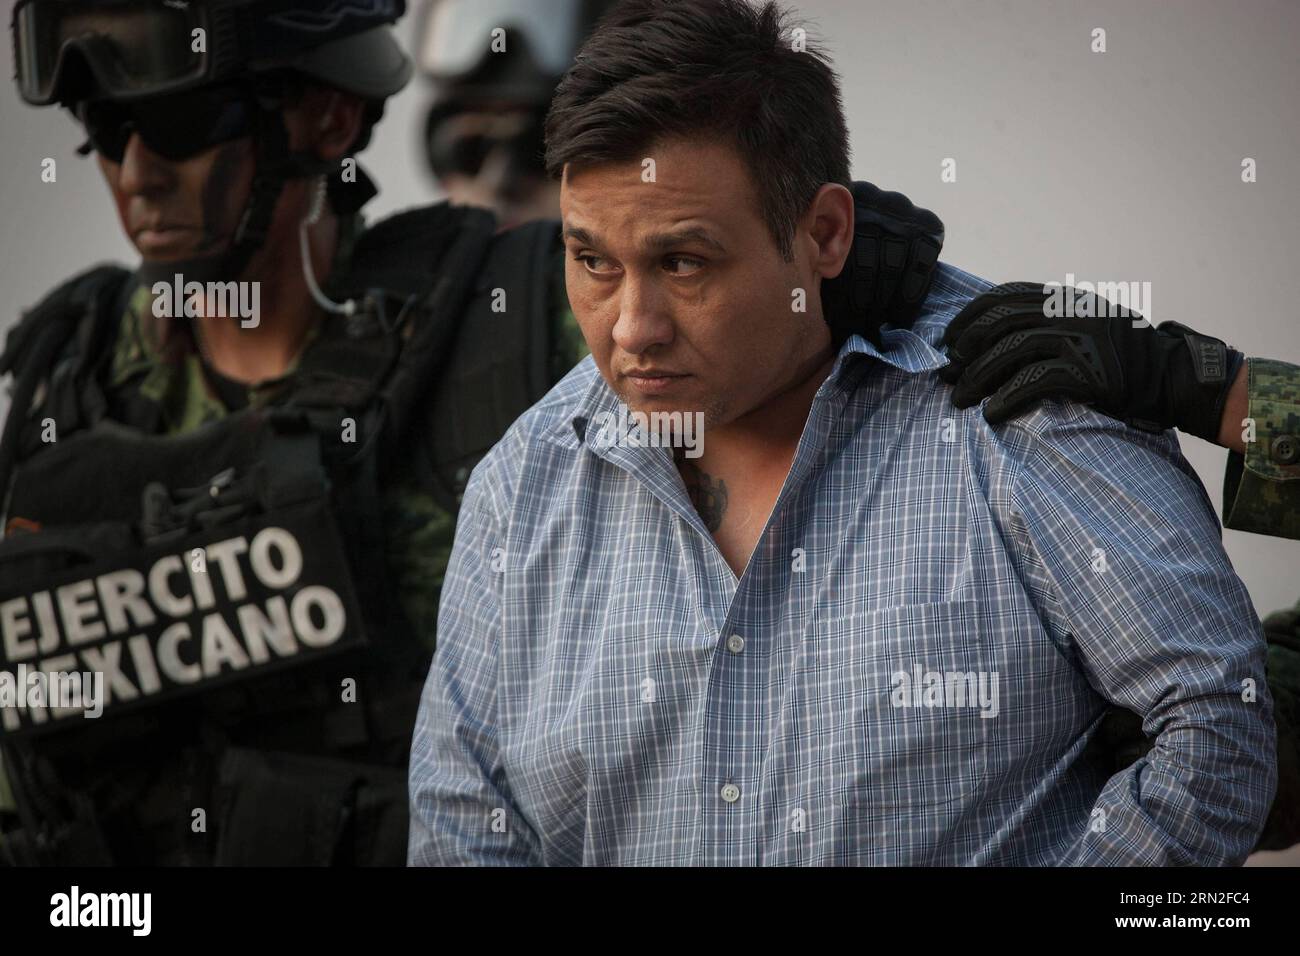 (150305) -- MEXICO CITY, March 4, 2015 -- Mexican Army personnel escort Omar Trevino Morales (R) in Mexico City, capital of Mexico, on March 4, 2015. Mexican authorities on Wednesday arrested the head of the country s northern Los Zetas drug cartel, Omar Trevino Morales. ) (jp) MEXICO-MEXICO CITY-TREVINO-ARREST PEDROxMERA PUBLICATIONxNOTxINxCHN   Mexico City March 4 2015 MEXICAN Army Personnel Escort Omar Trevino Morales r in Mexico City Capital of Mexico ON March 4 2015 MEXICAN Authorities ON Wednesday Arrested The Head of The Country S Northern Los Zetas Drug Cartel Omar Trevino Morales JP M Stock Photo